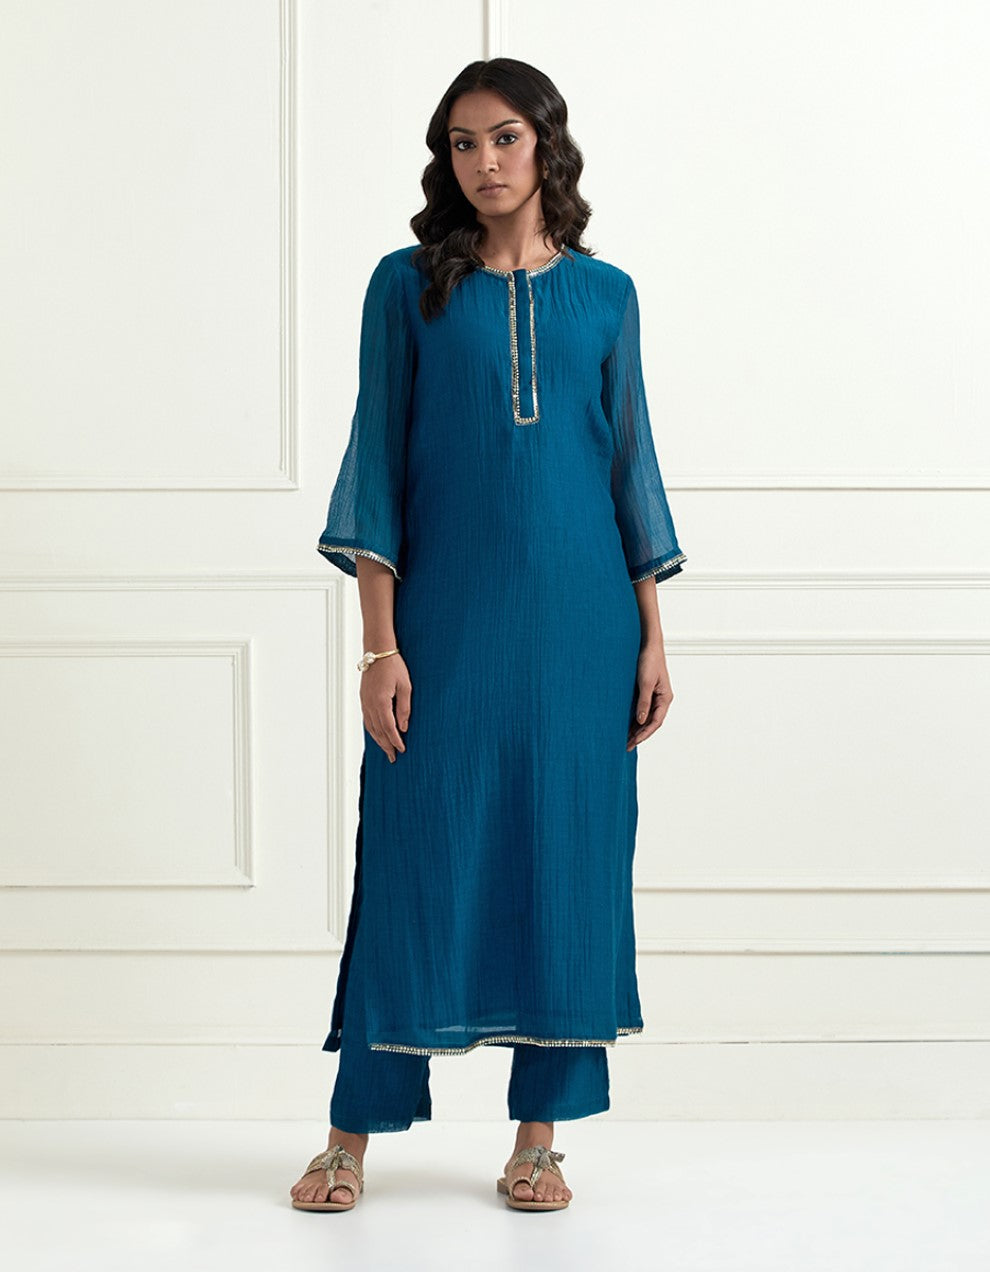 Navy blue hand embroidered kurta with pants and dupatta